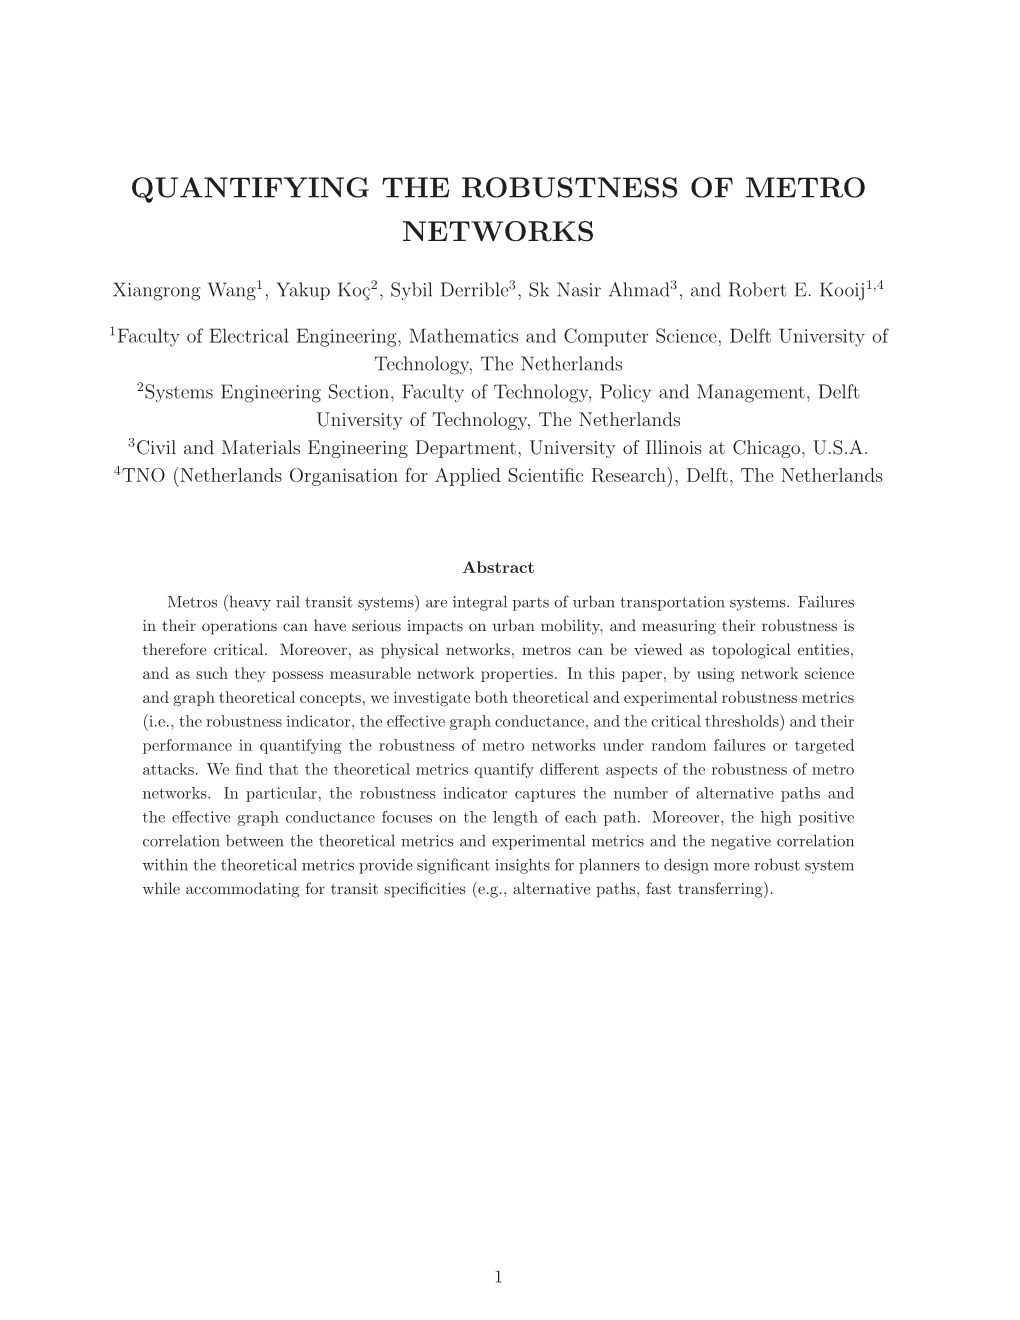 Quantifying the Robustness of Metro Networks